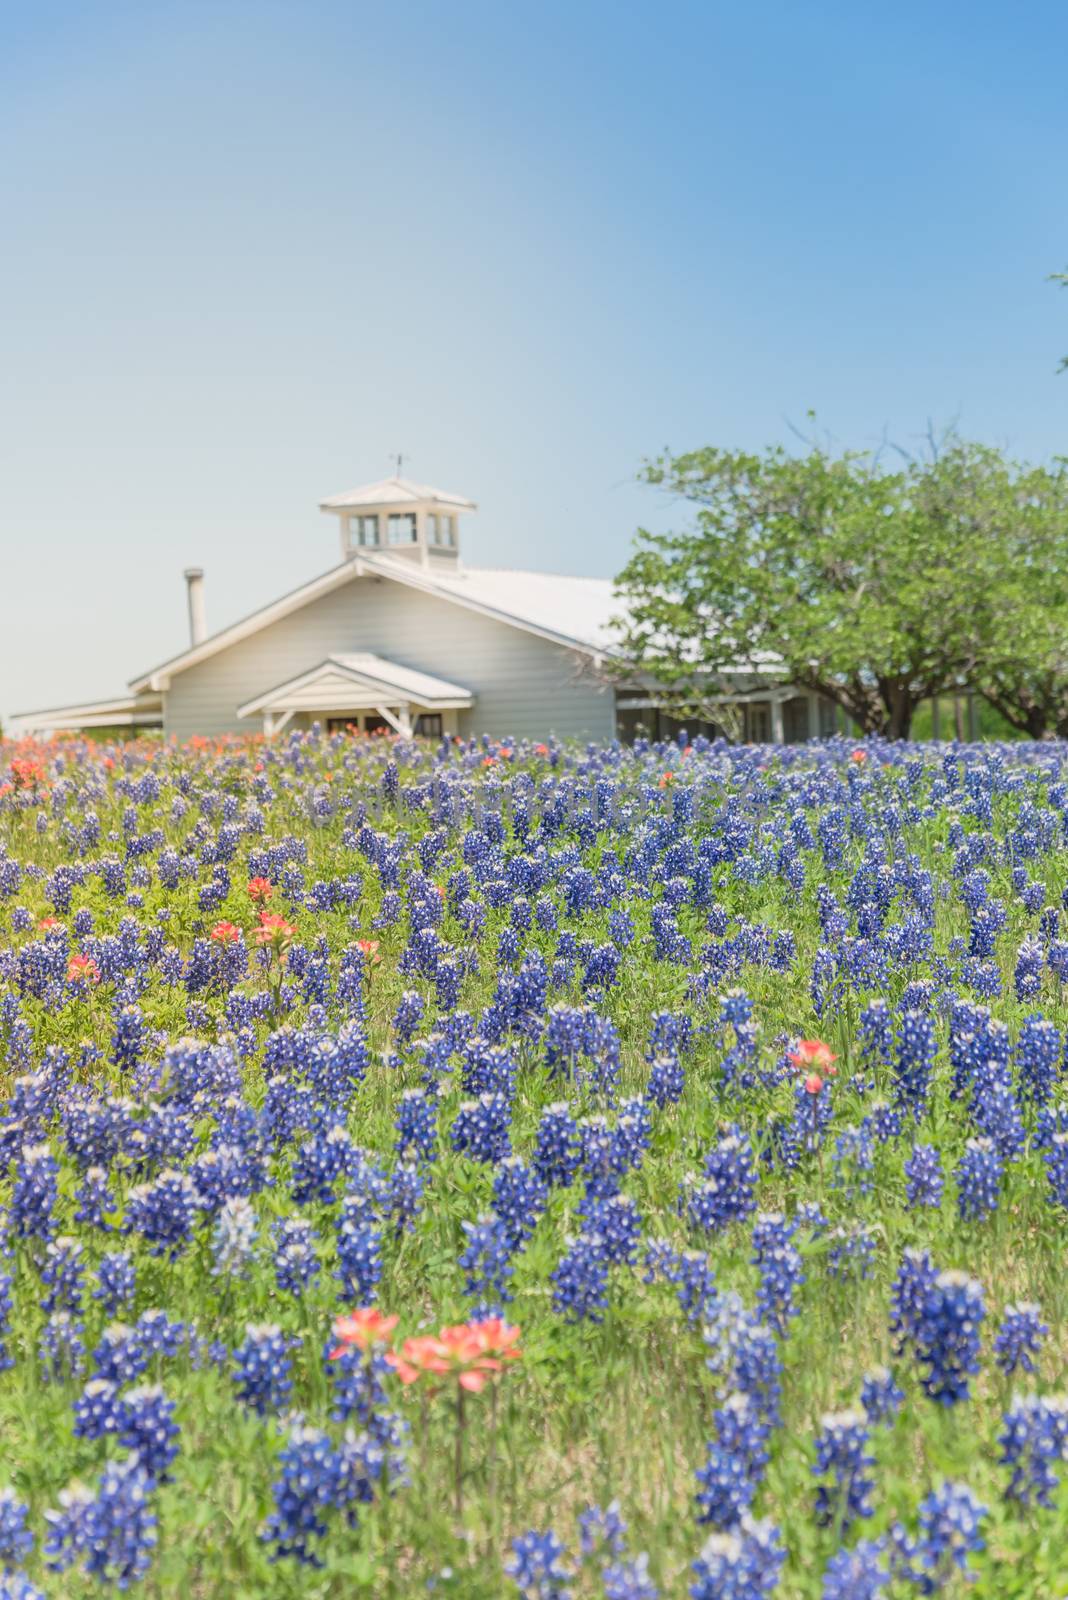 Colorful Bluebonnet blossom at farm in North Texas, America by trongnguyen